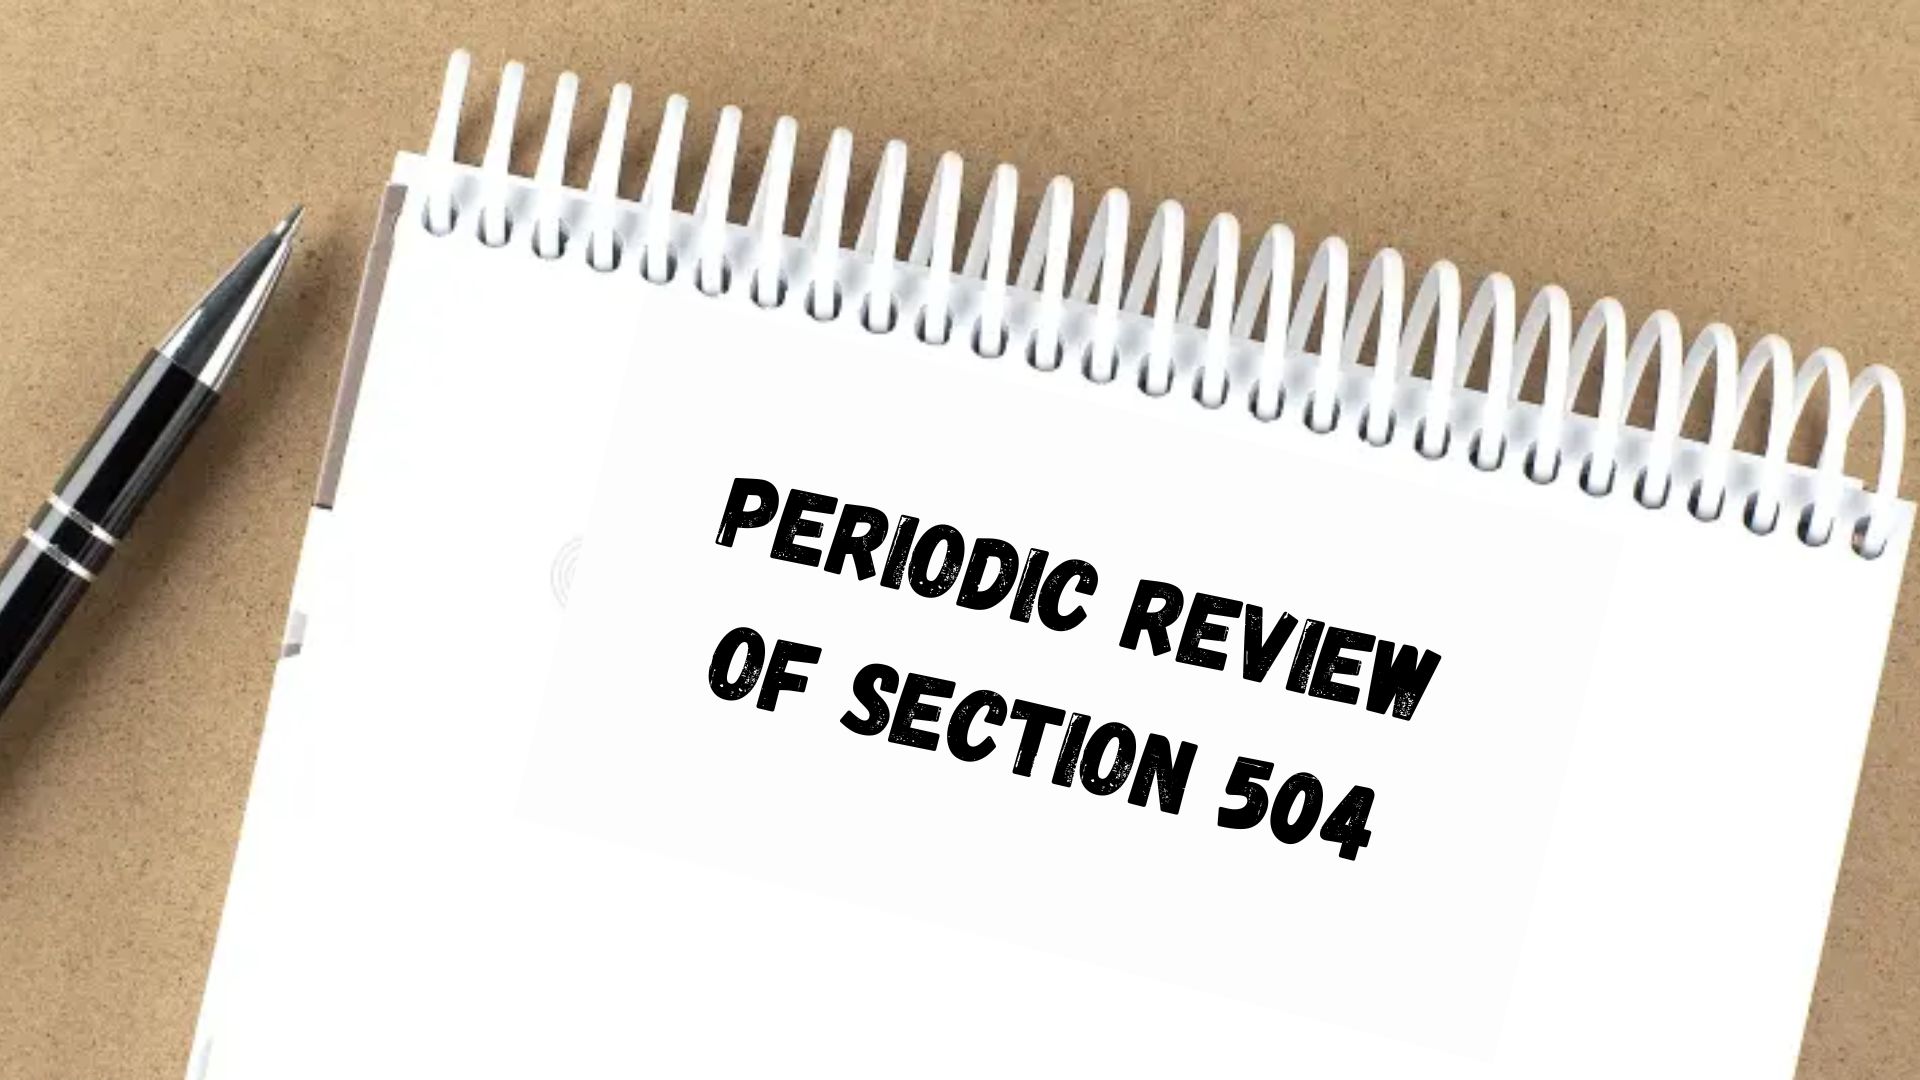 Periodic Review of Section 504.